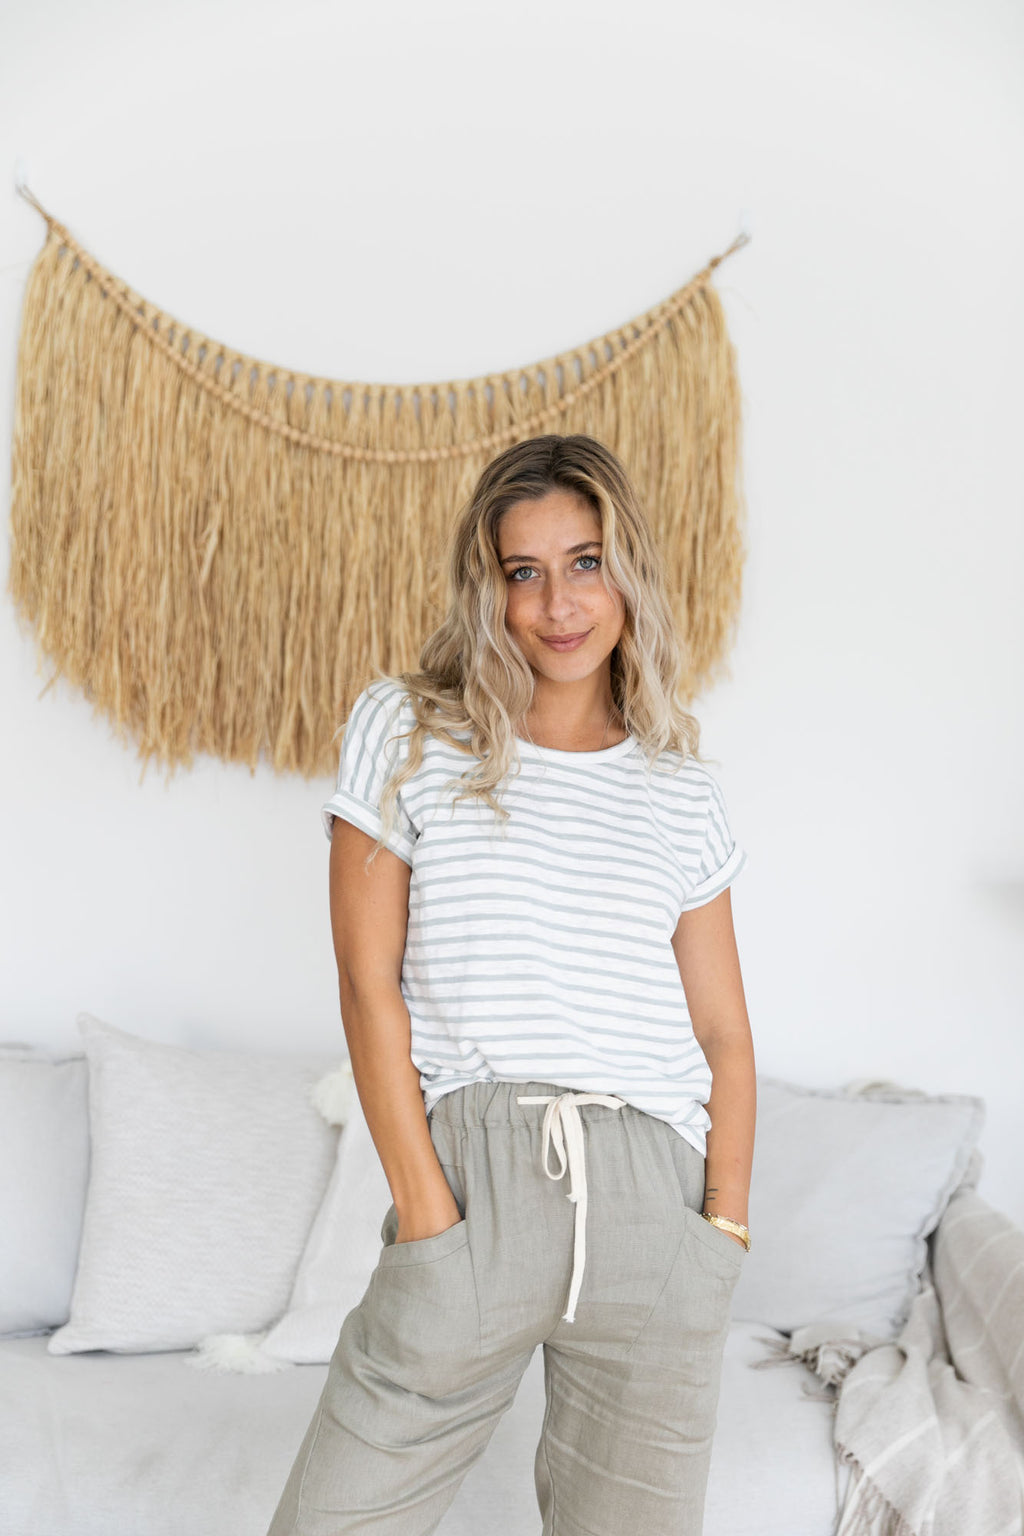 oscar stripe tee by little lies is a cotton rolled sleeve t shirt